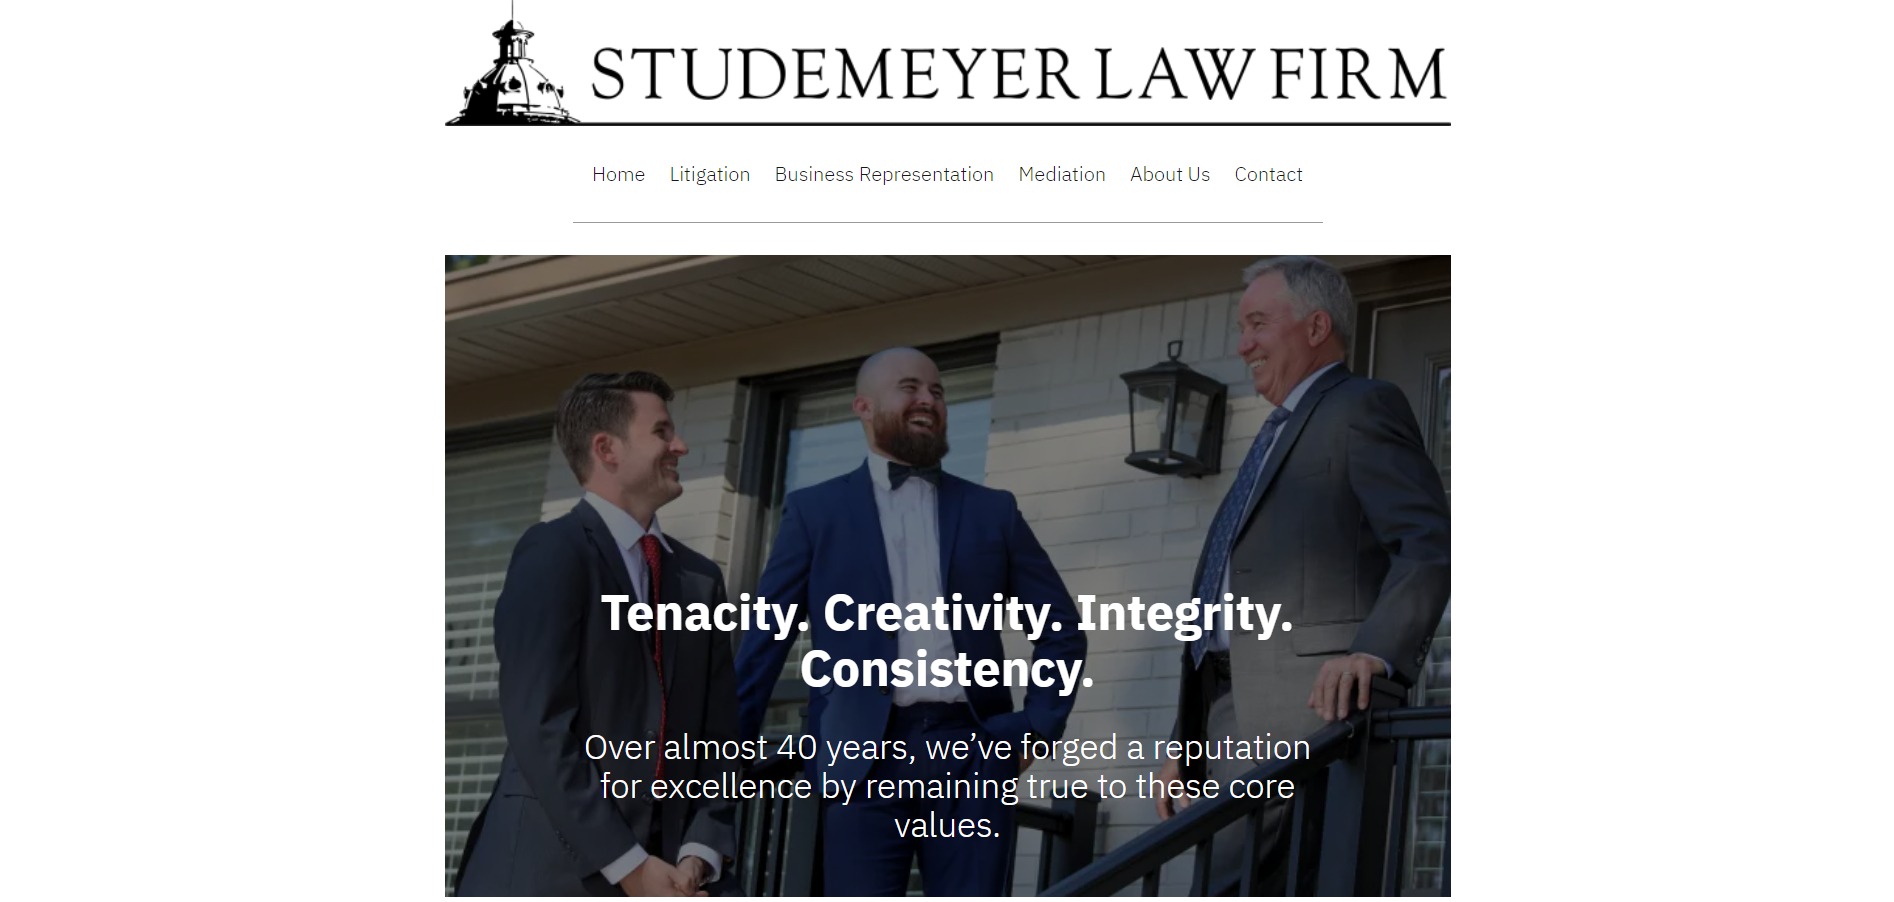 Studemeyer Law Firm - Corporate Lawyers serving Irmo SC